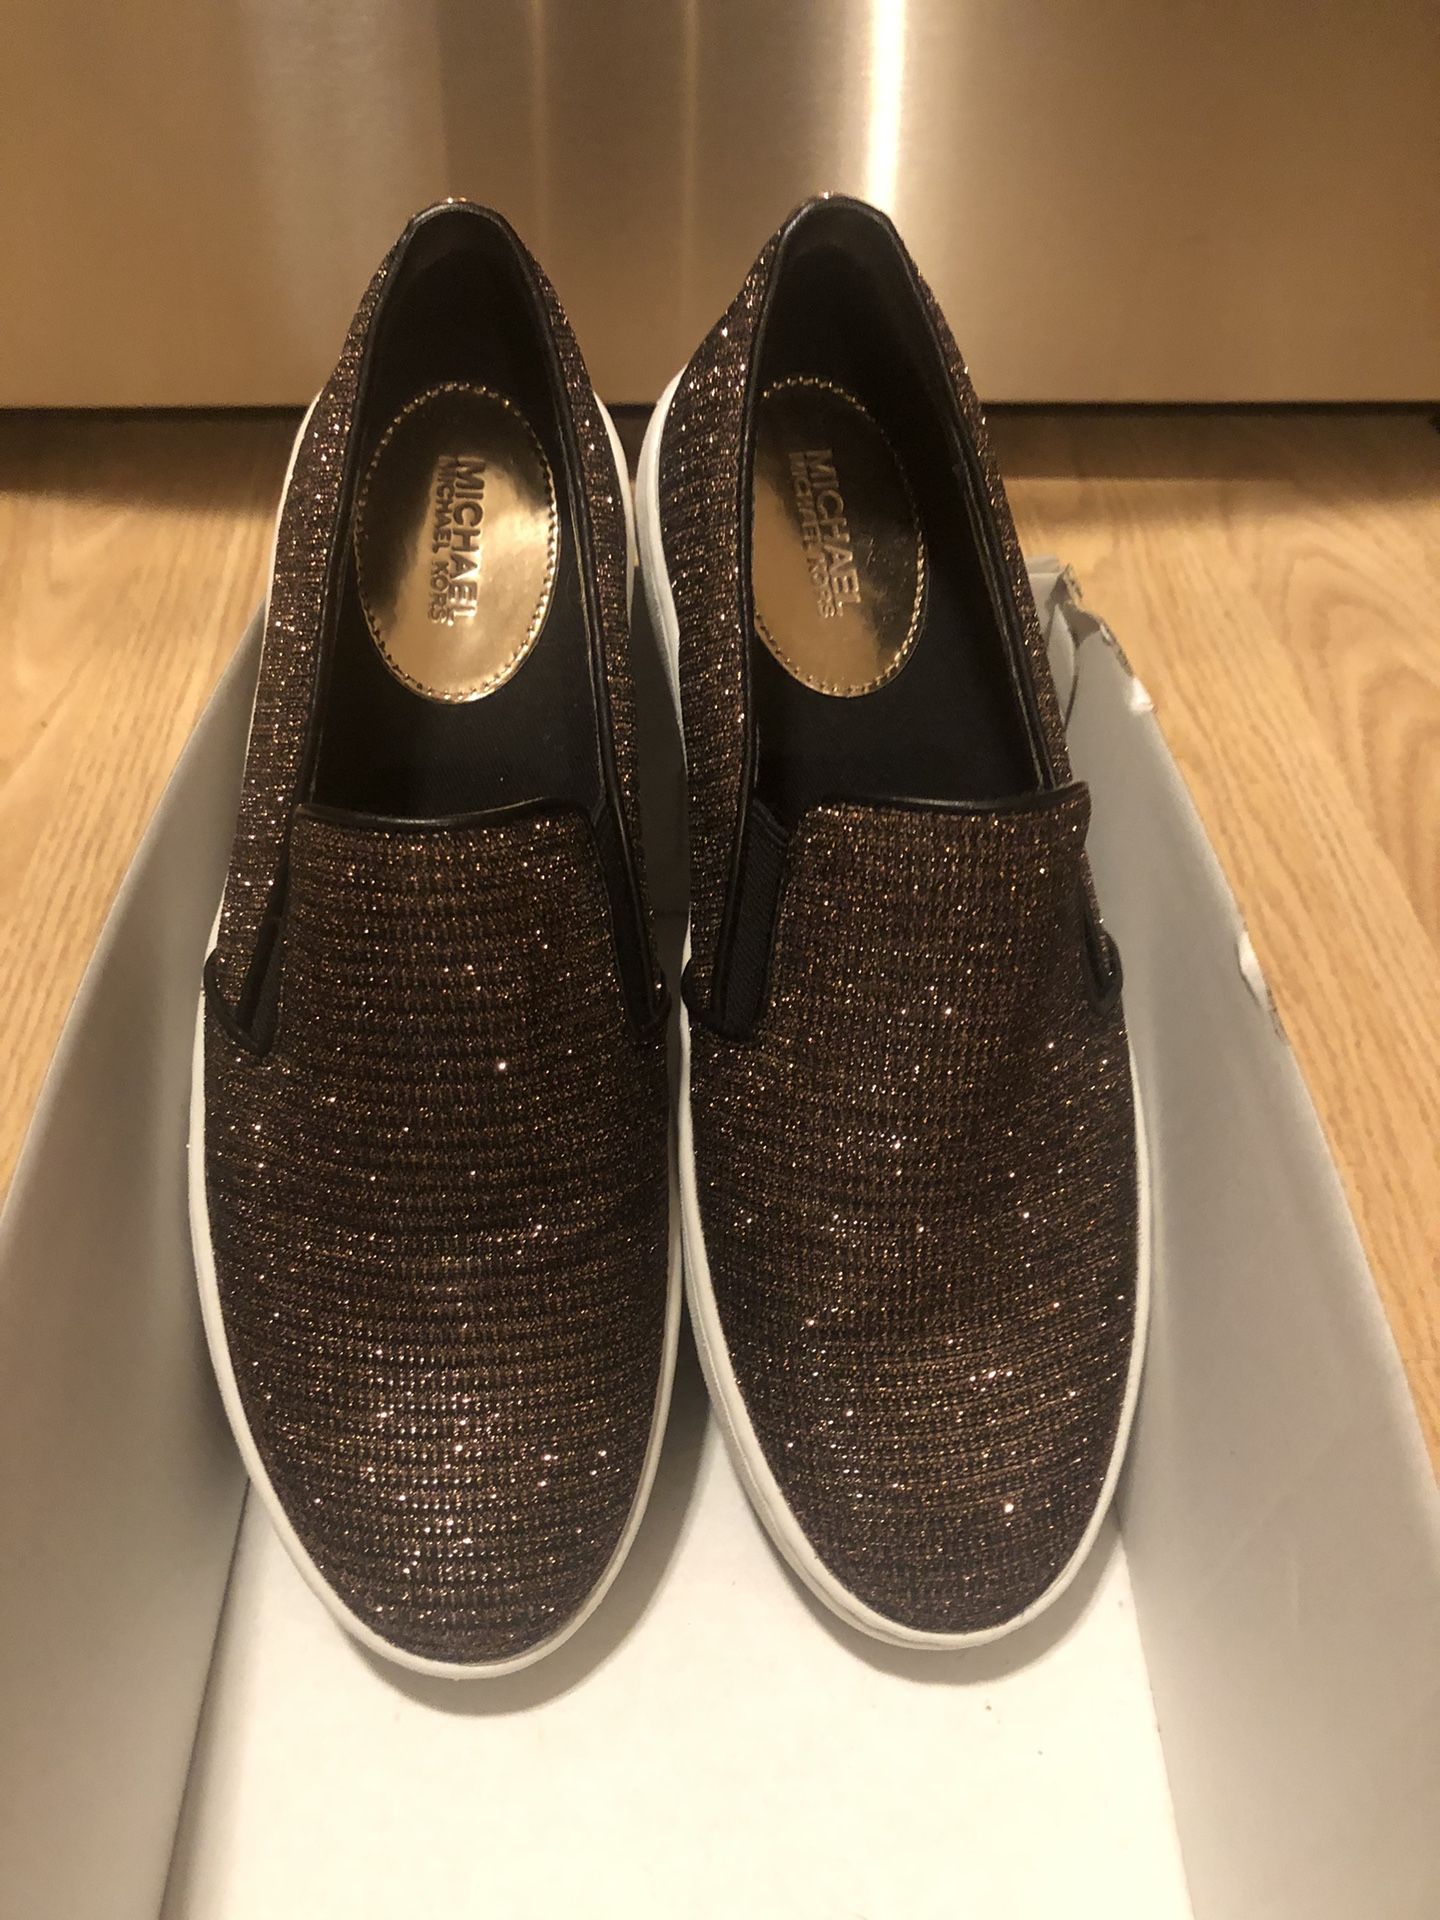 Women’s New Sparkly MK Shoes Size 6.5